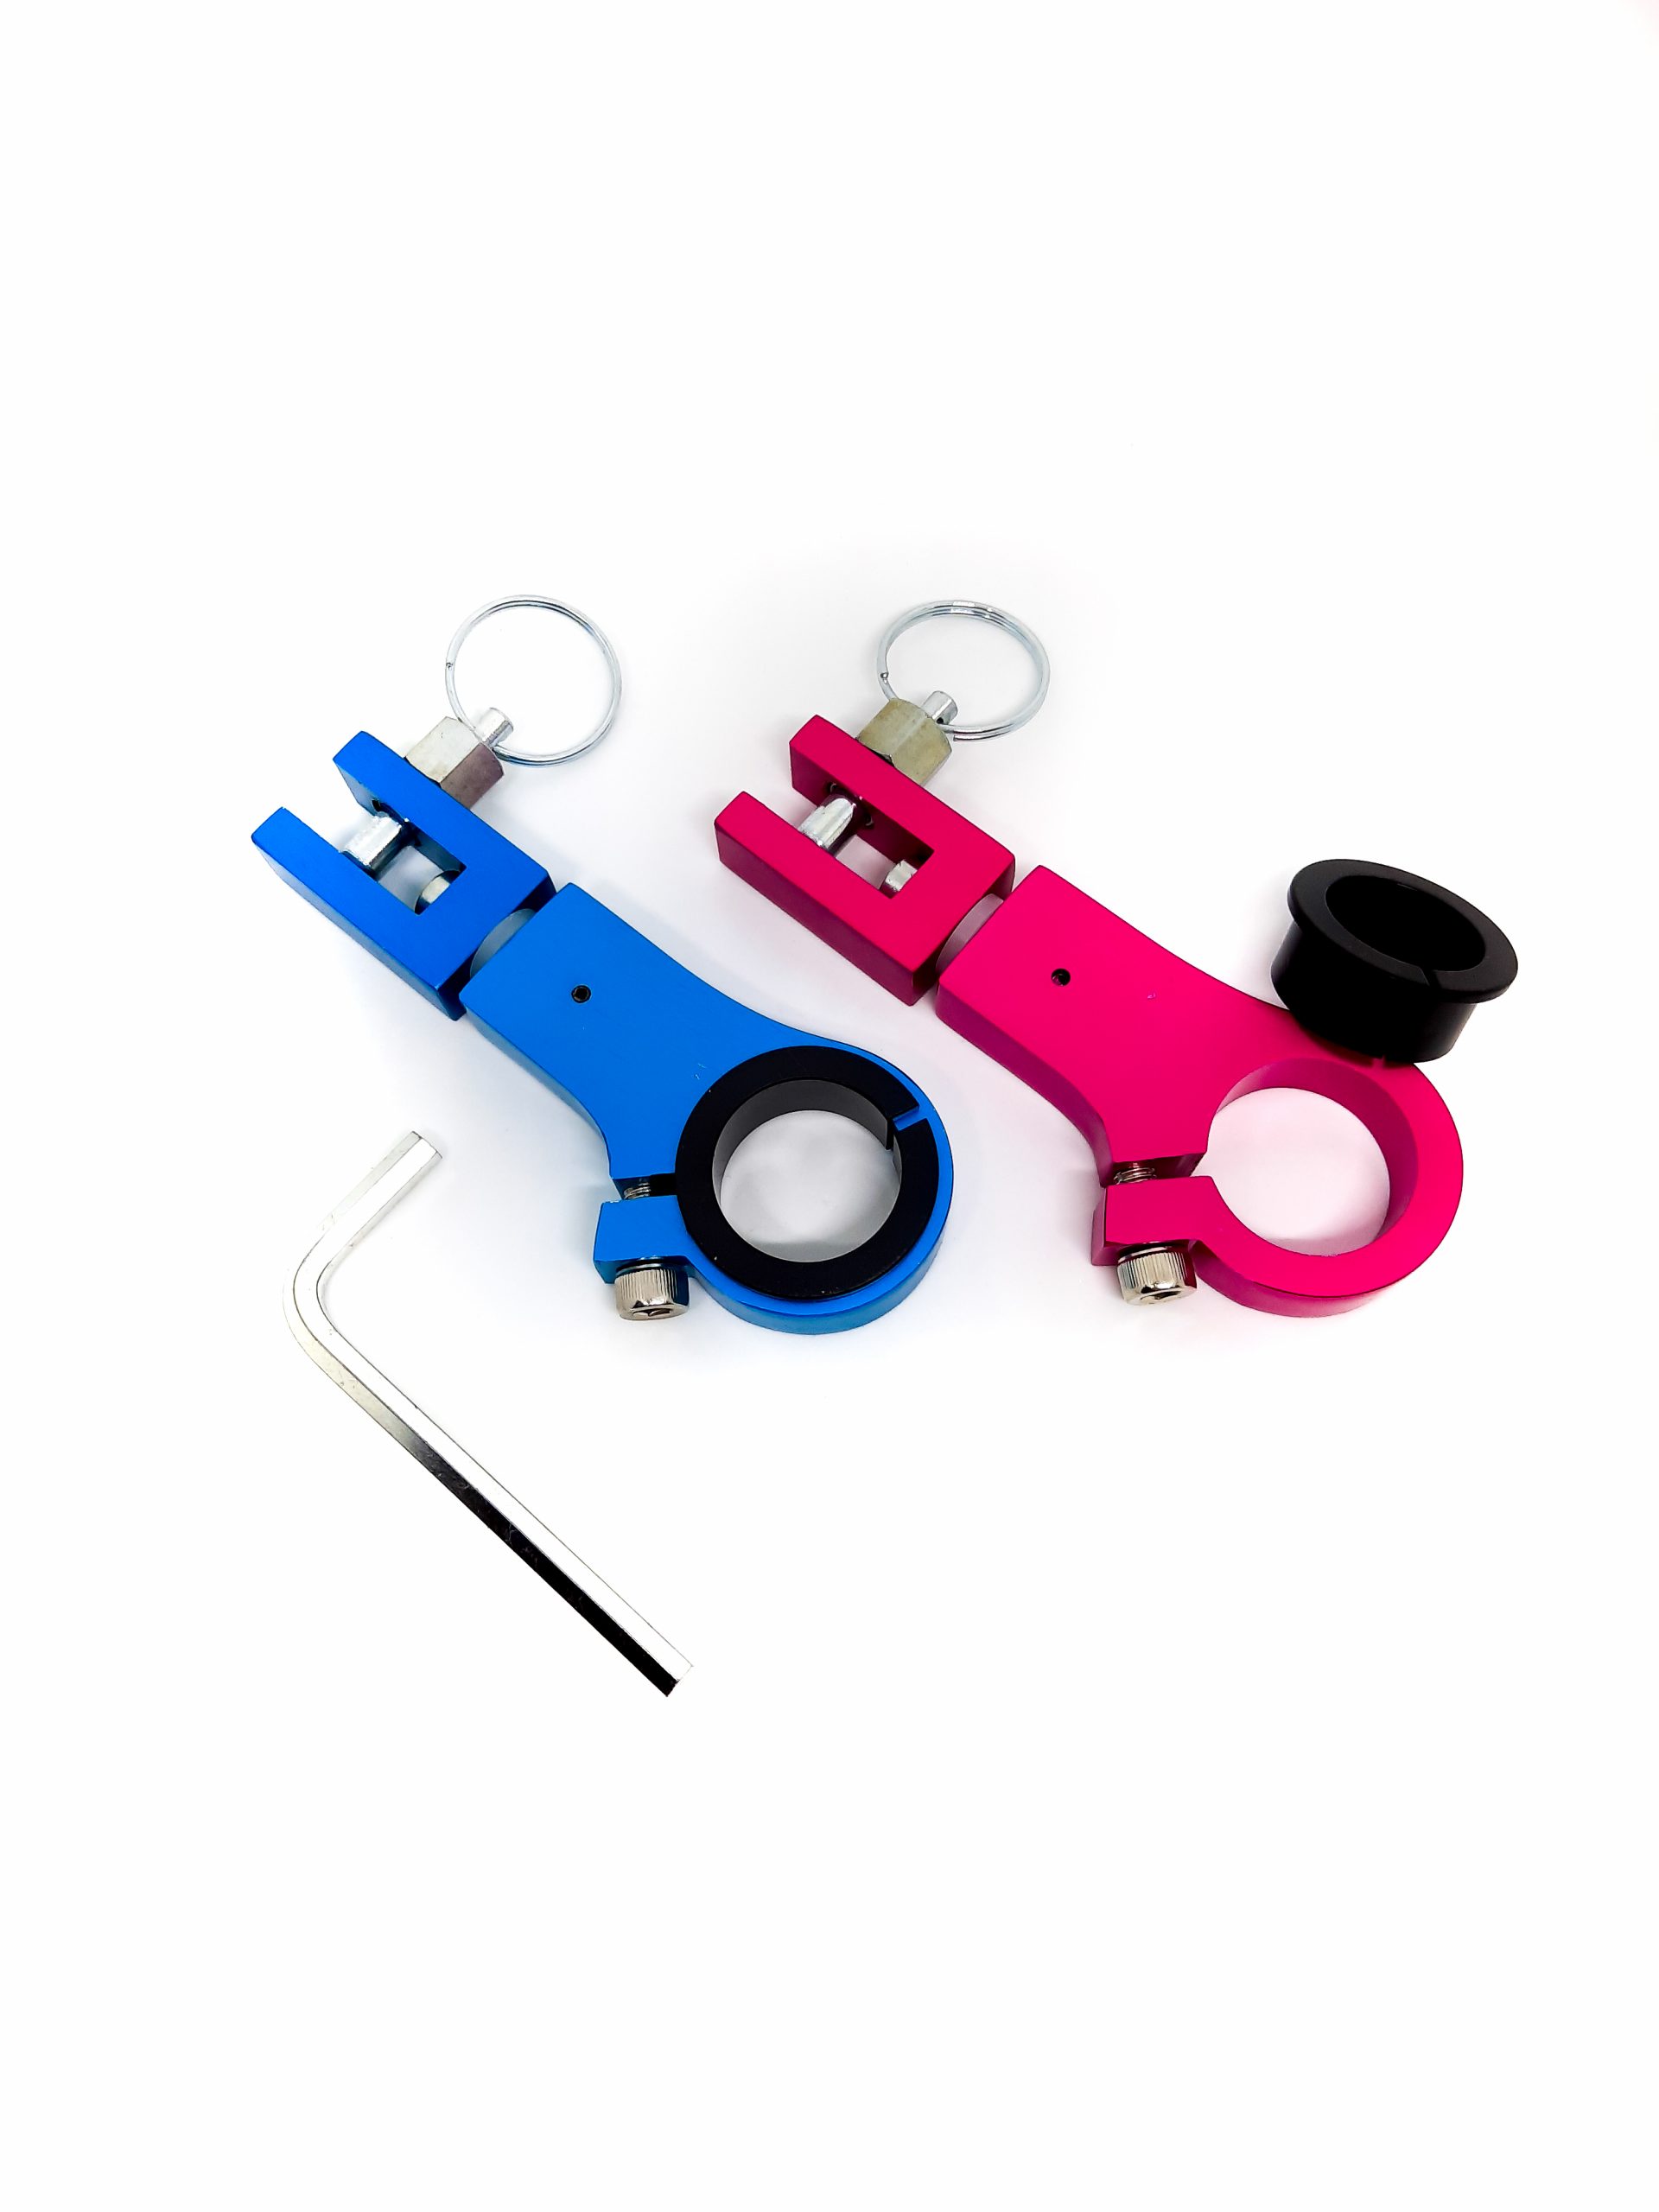 Pink and Blue Pushmehome Clamp with accessories